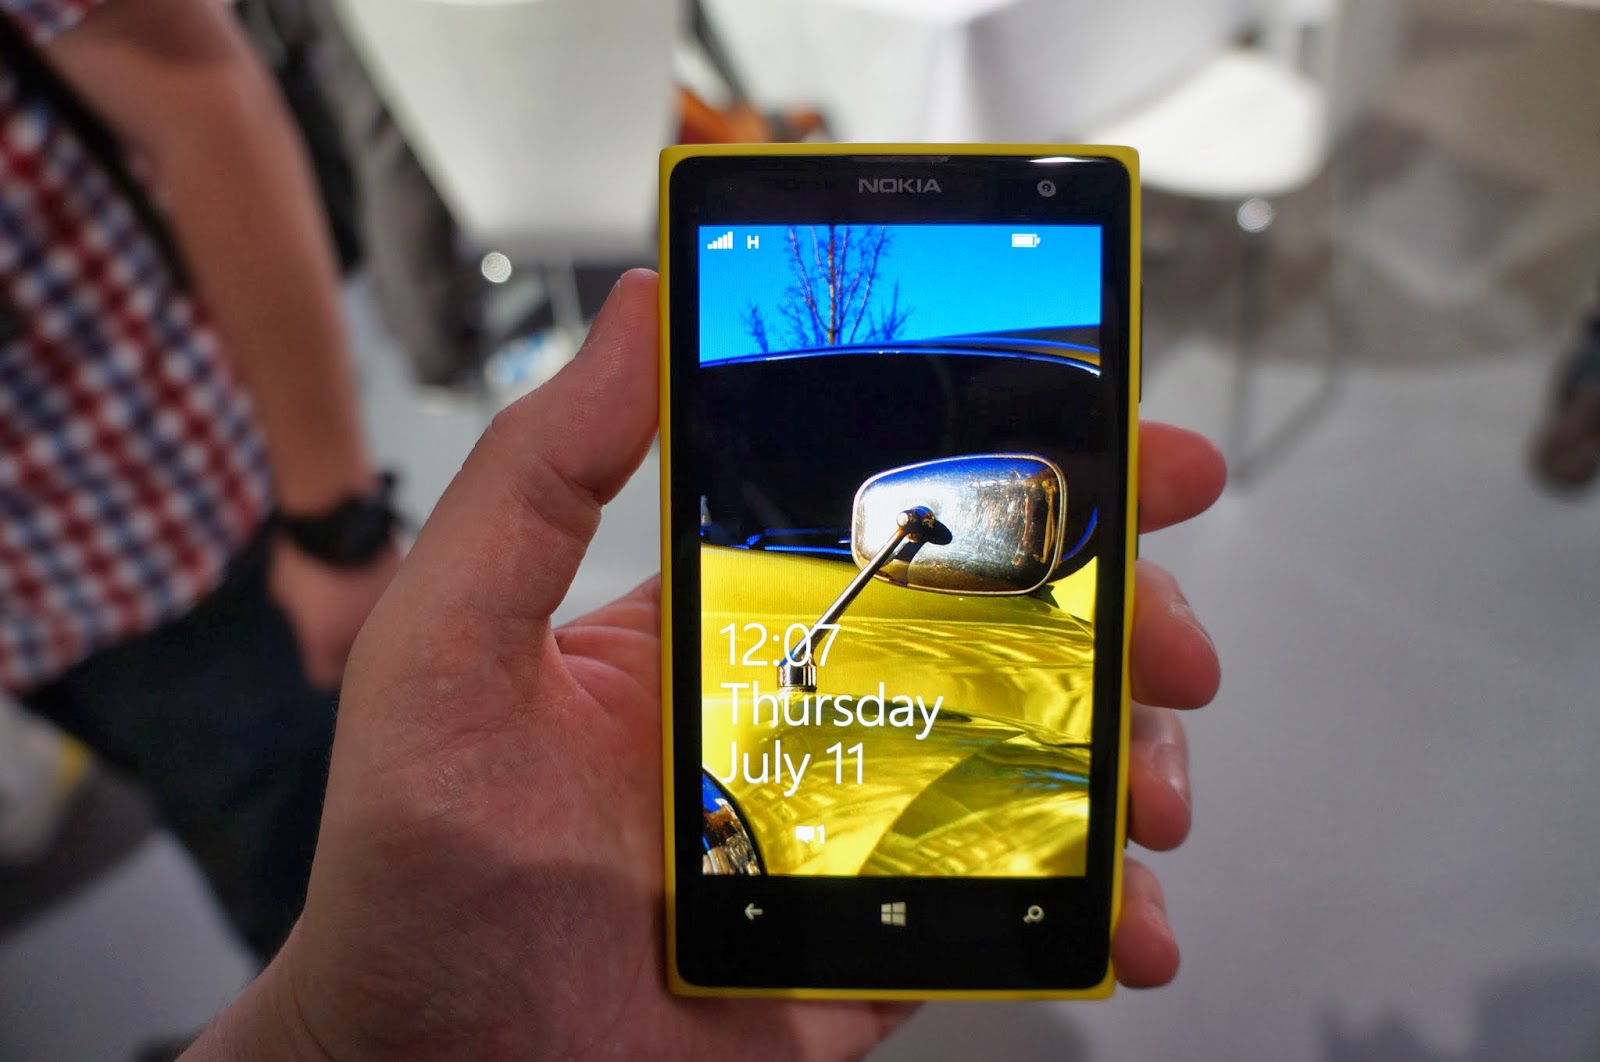 Nokia Lumia 1020 HD Wallpapers | HDWallpapers360.com - High Definition ...